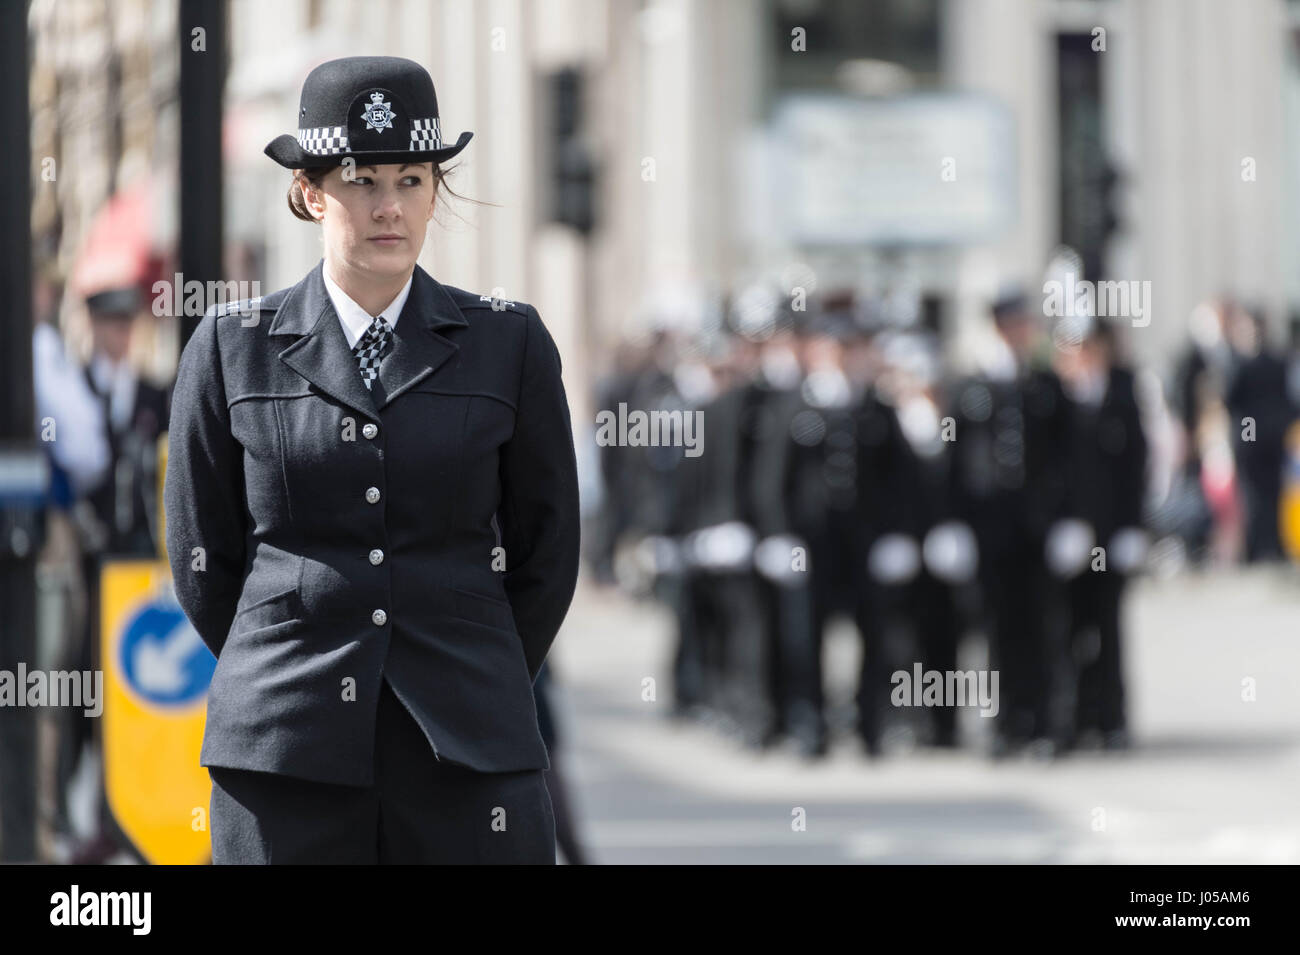 London, UK. 10th Apr, 2017. Funeral day of PC Keith Palmer who was killed in Westminster on 22nd March. Credit: Guy Corbishley/Alamy Live News Stock Photo